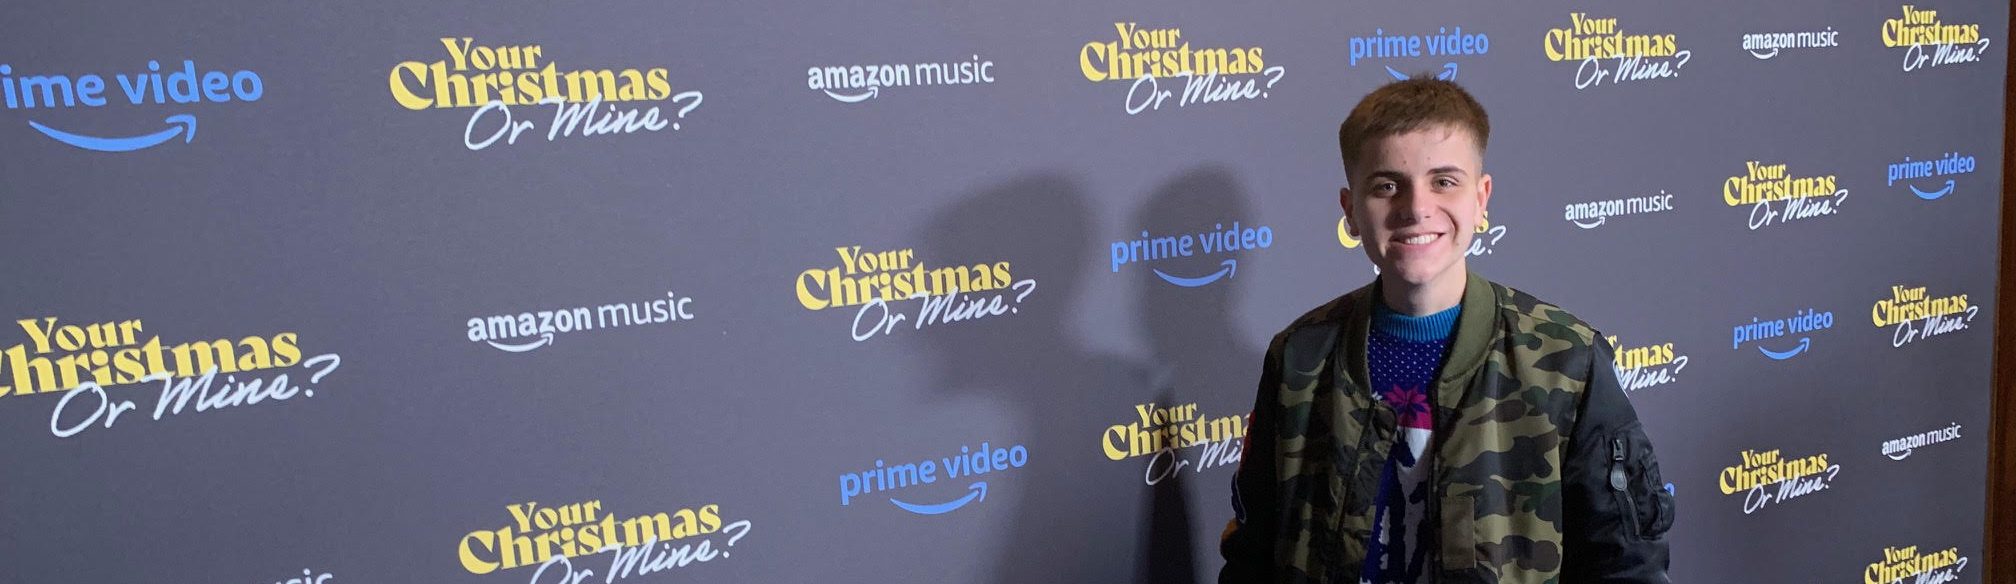 Prime Video – Your Christmas or Mine?